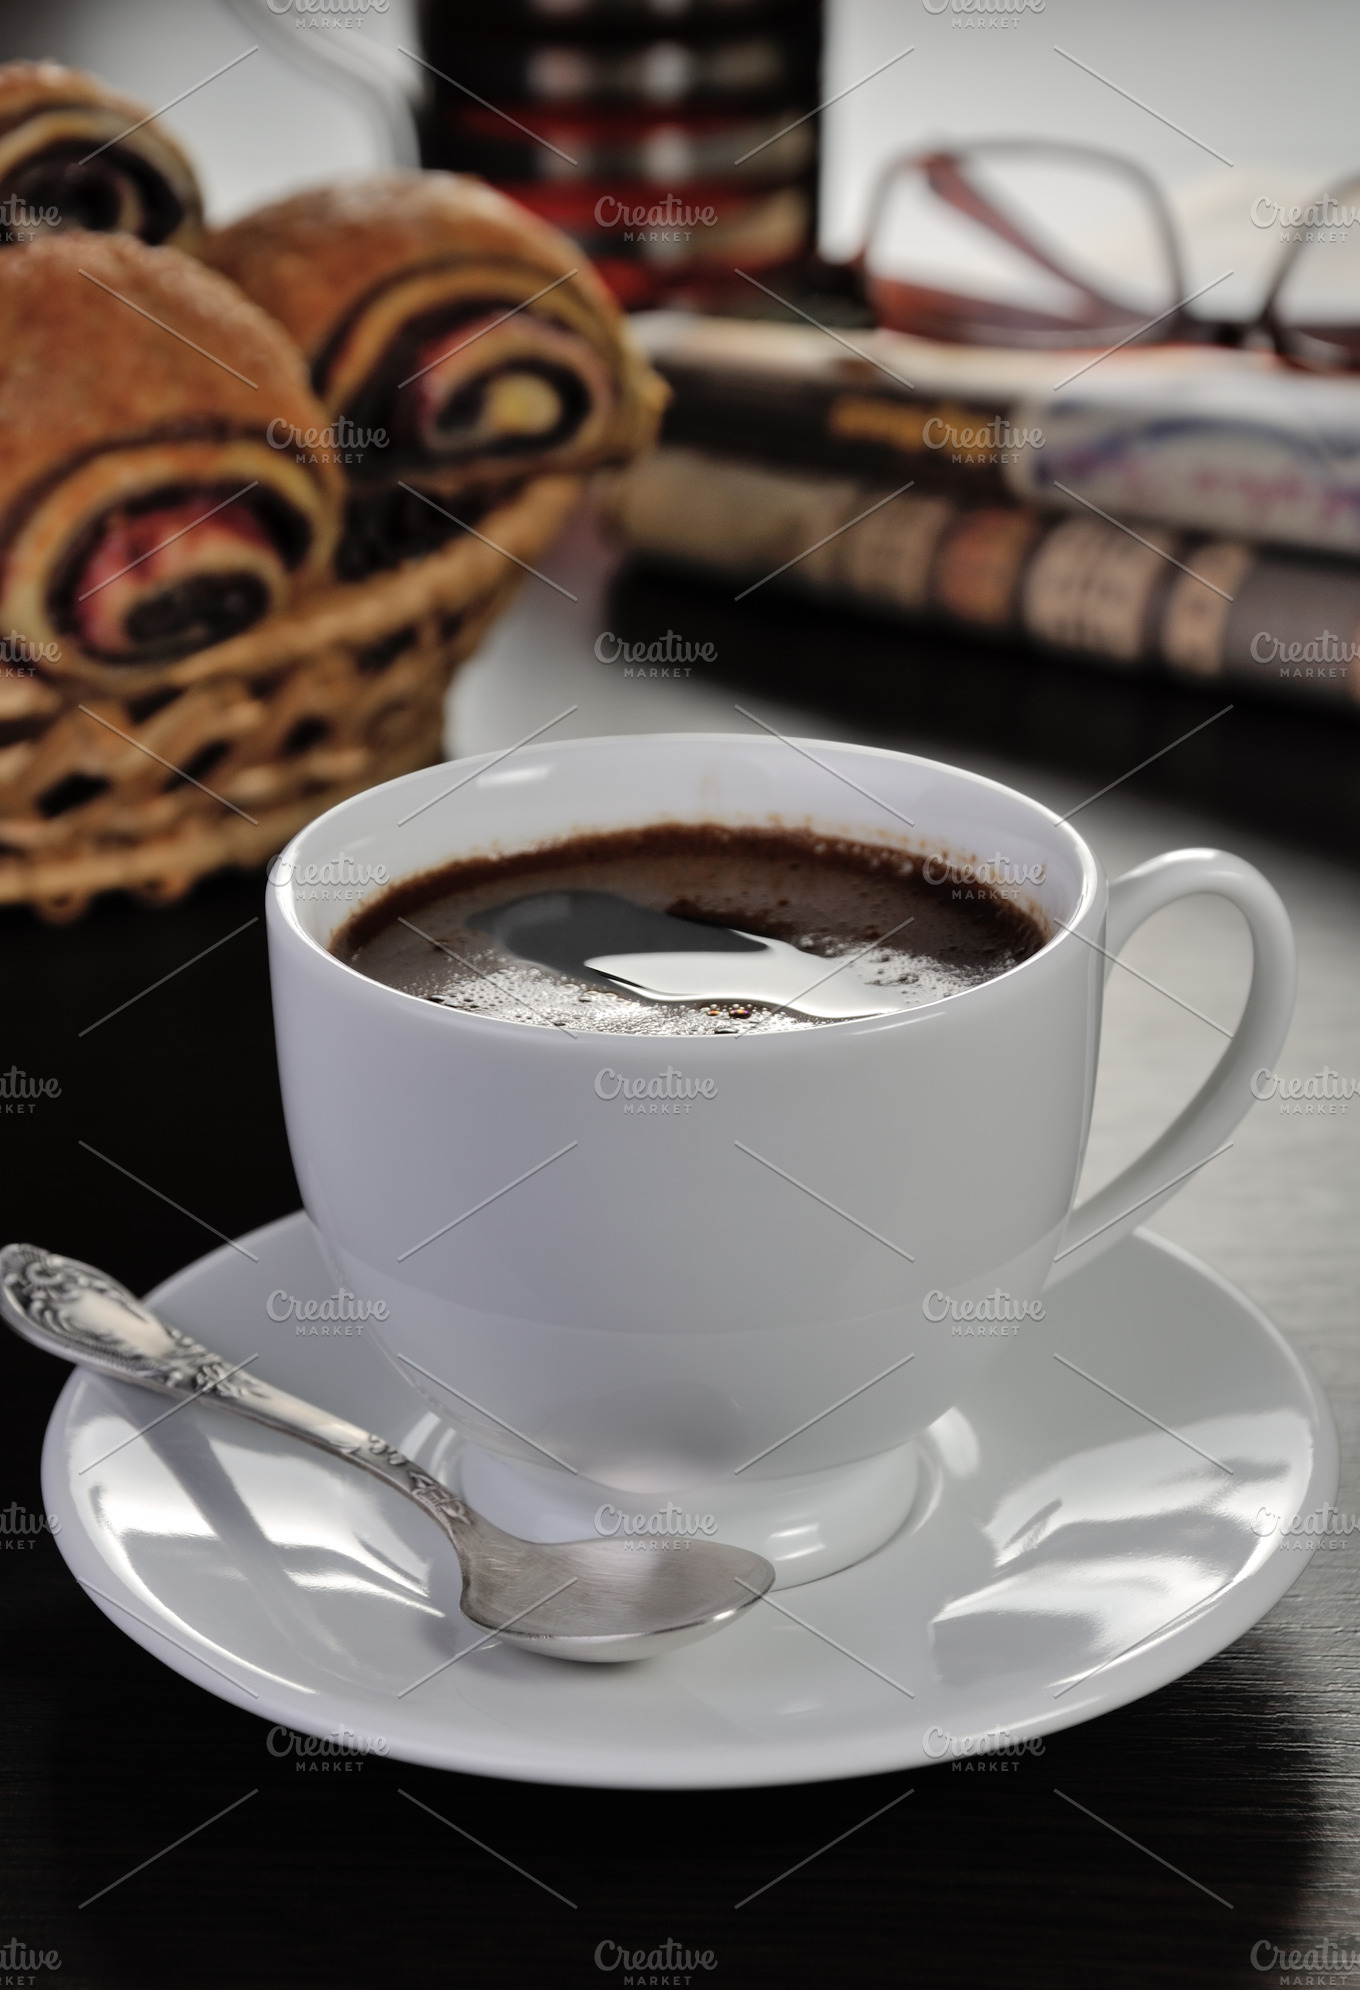 cup of coffee | High-Quality Food Images ~ Creative Market